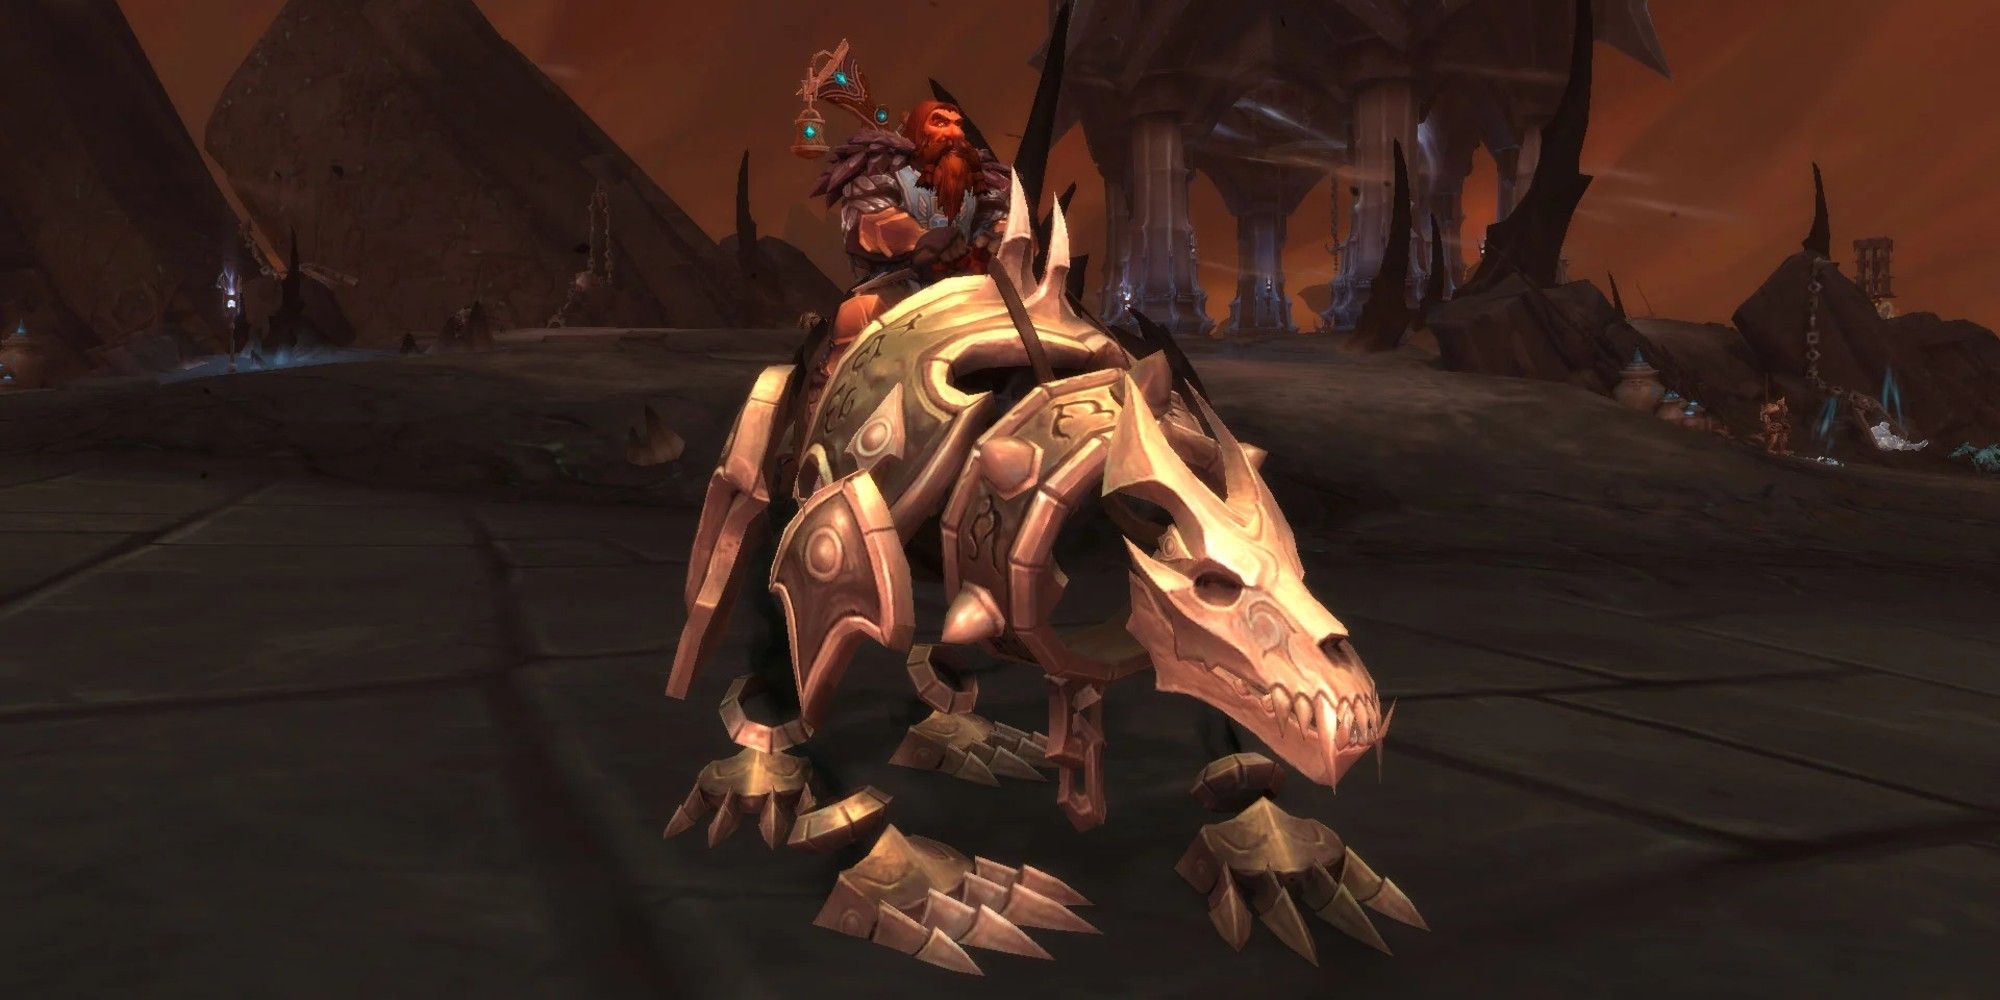 A character rides a mount in The Maw in World of Warcraft: Shadowlands